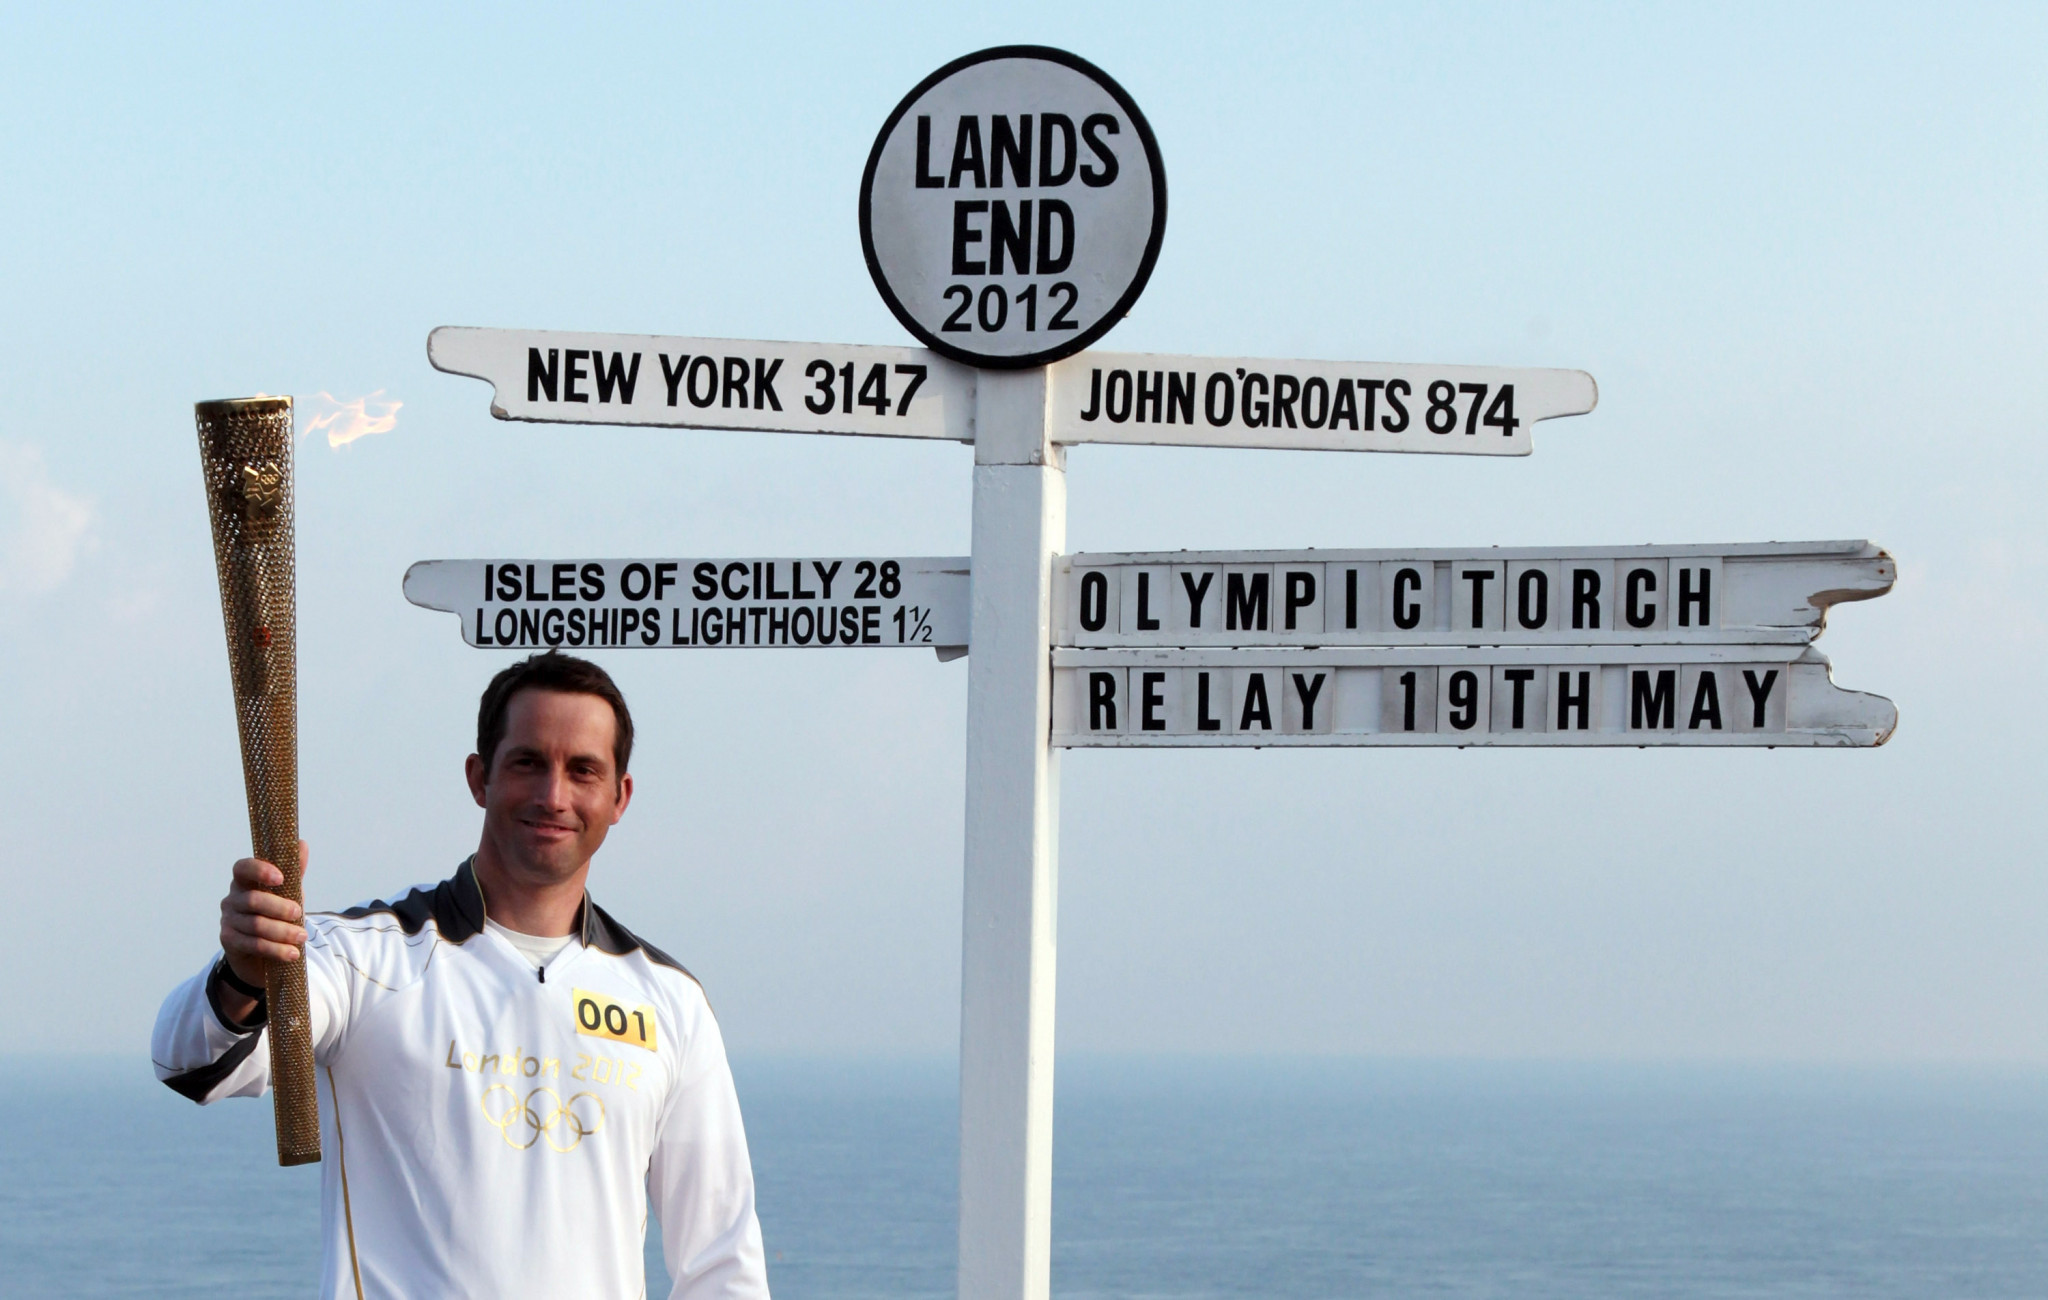 Legendary Olympic sailor Sir Ben Ainslie was the first London 2012 Torch Bearer on British soil at Land's End ©Getty Images